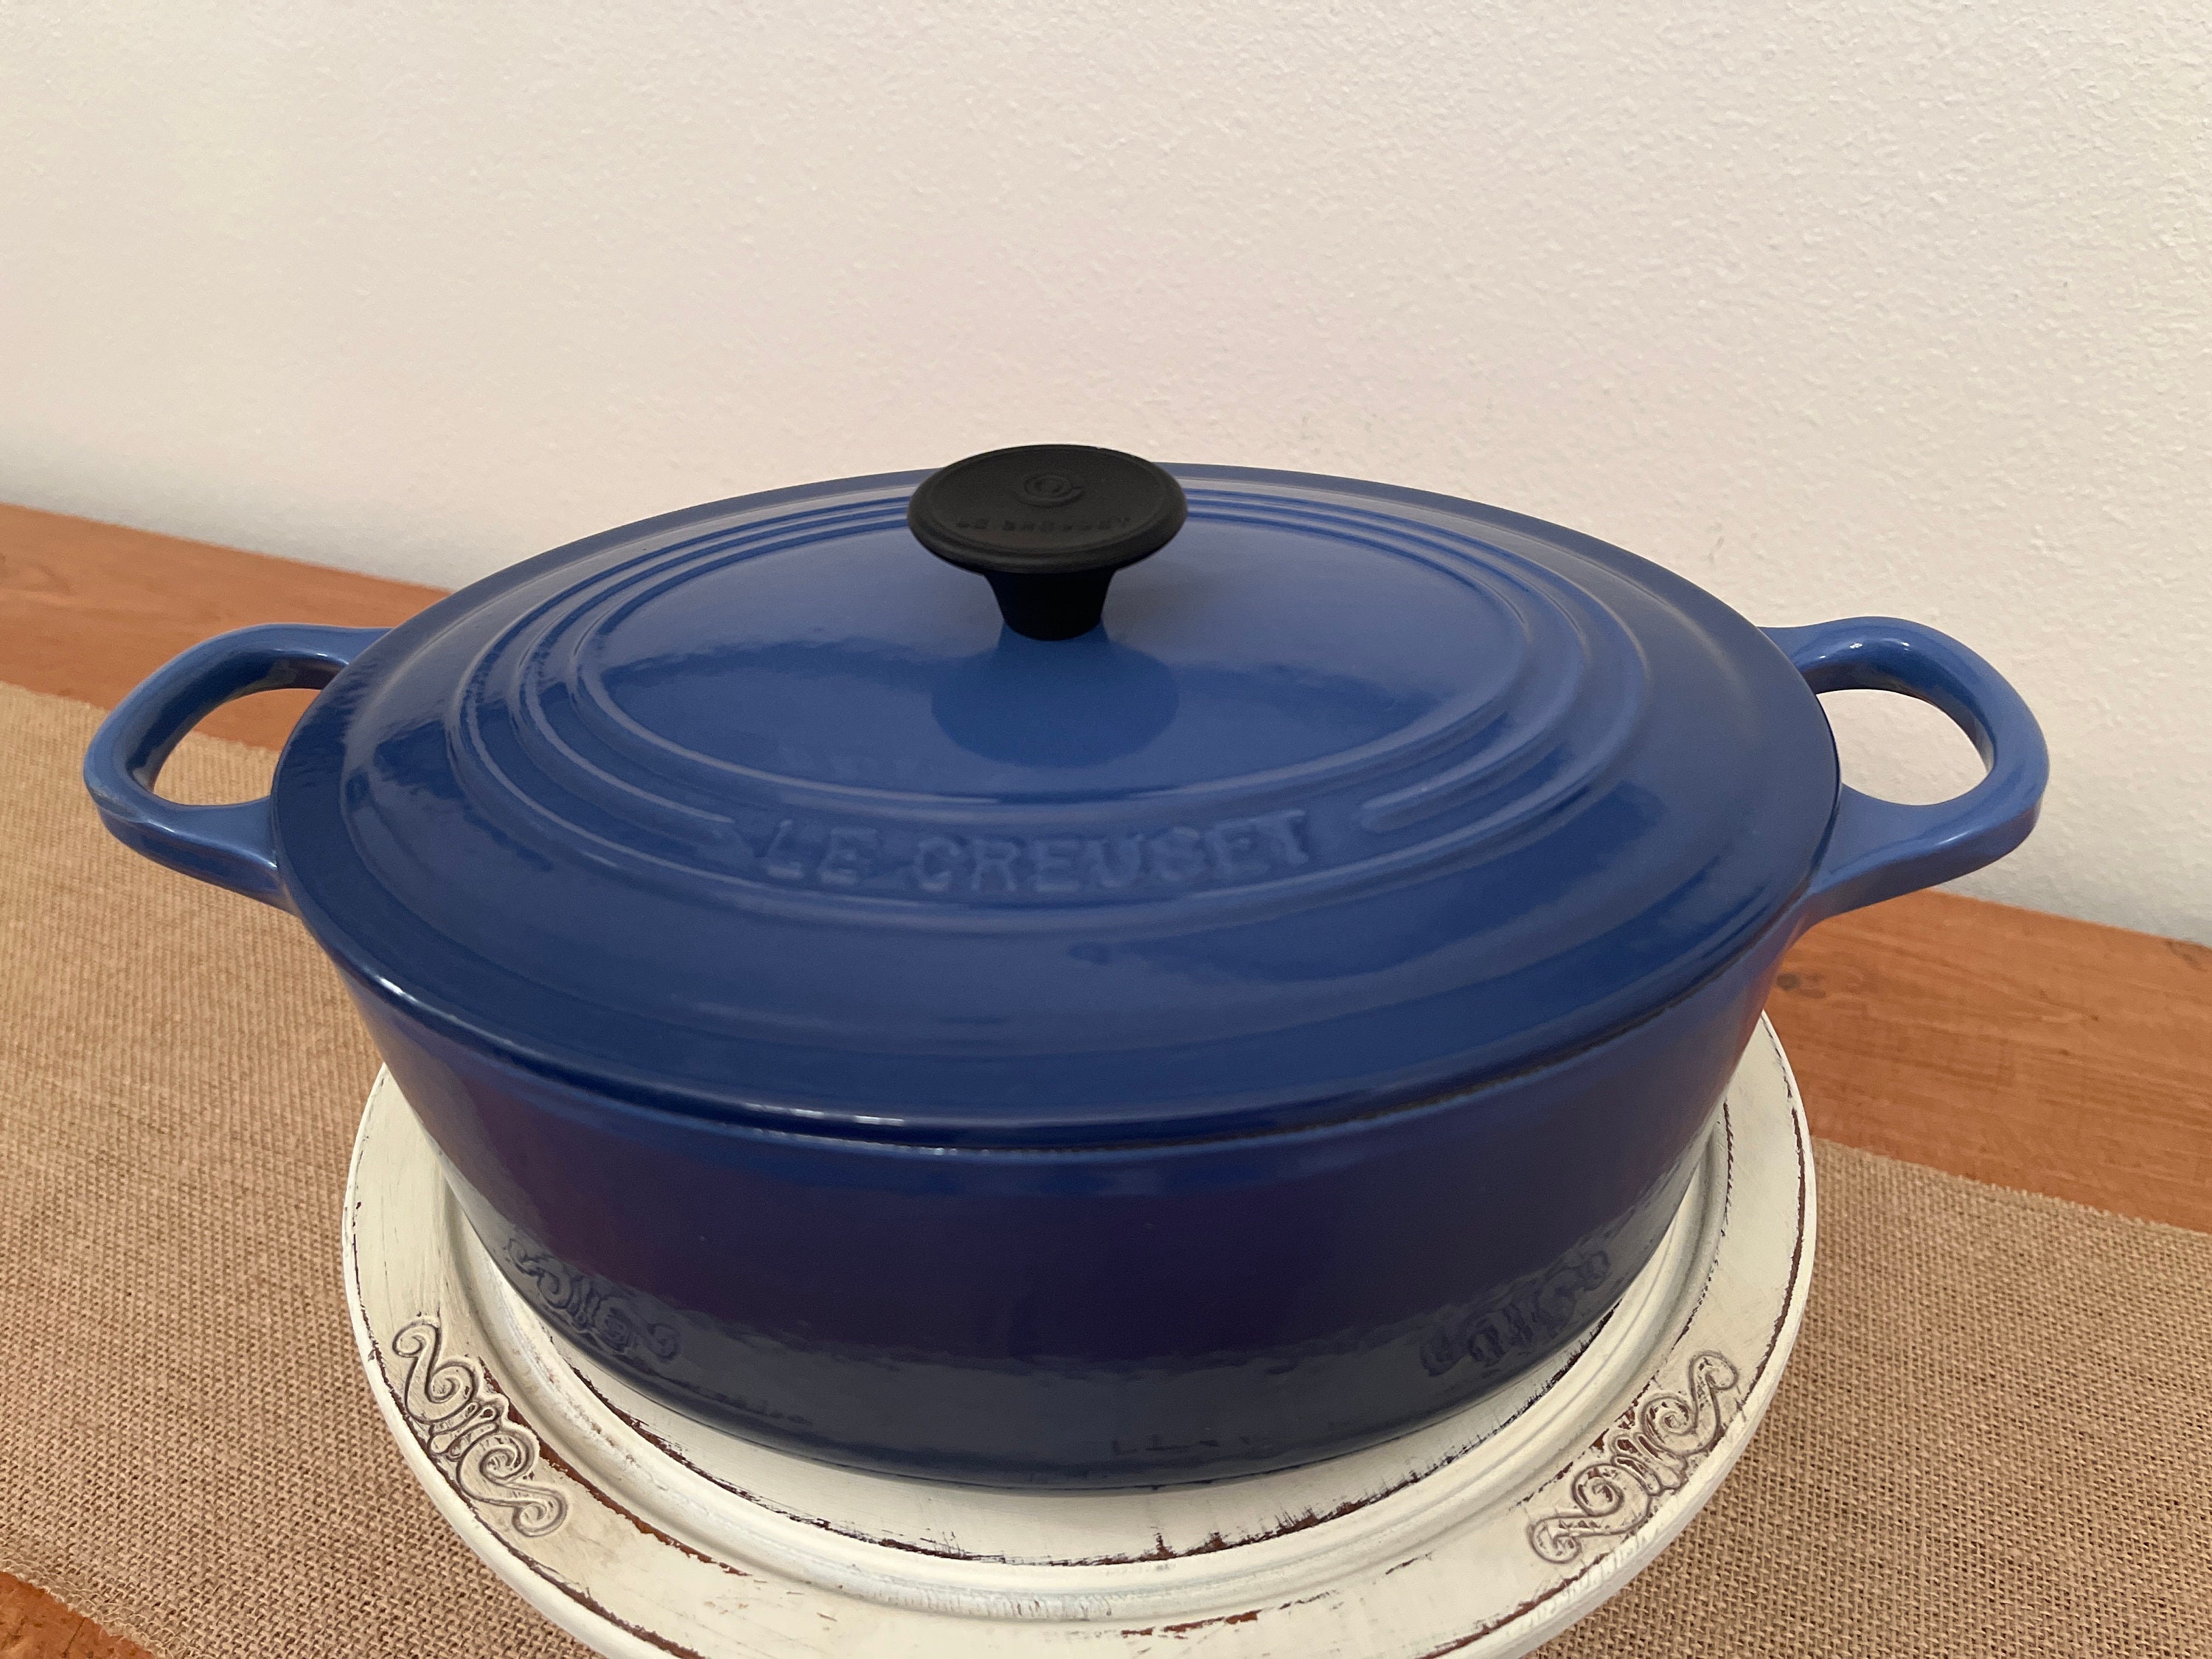 Le Creuset Enameled Cast Iron Dutch Oven with Trivet and Stoneware Pitcher